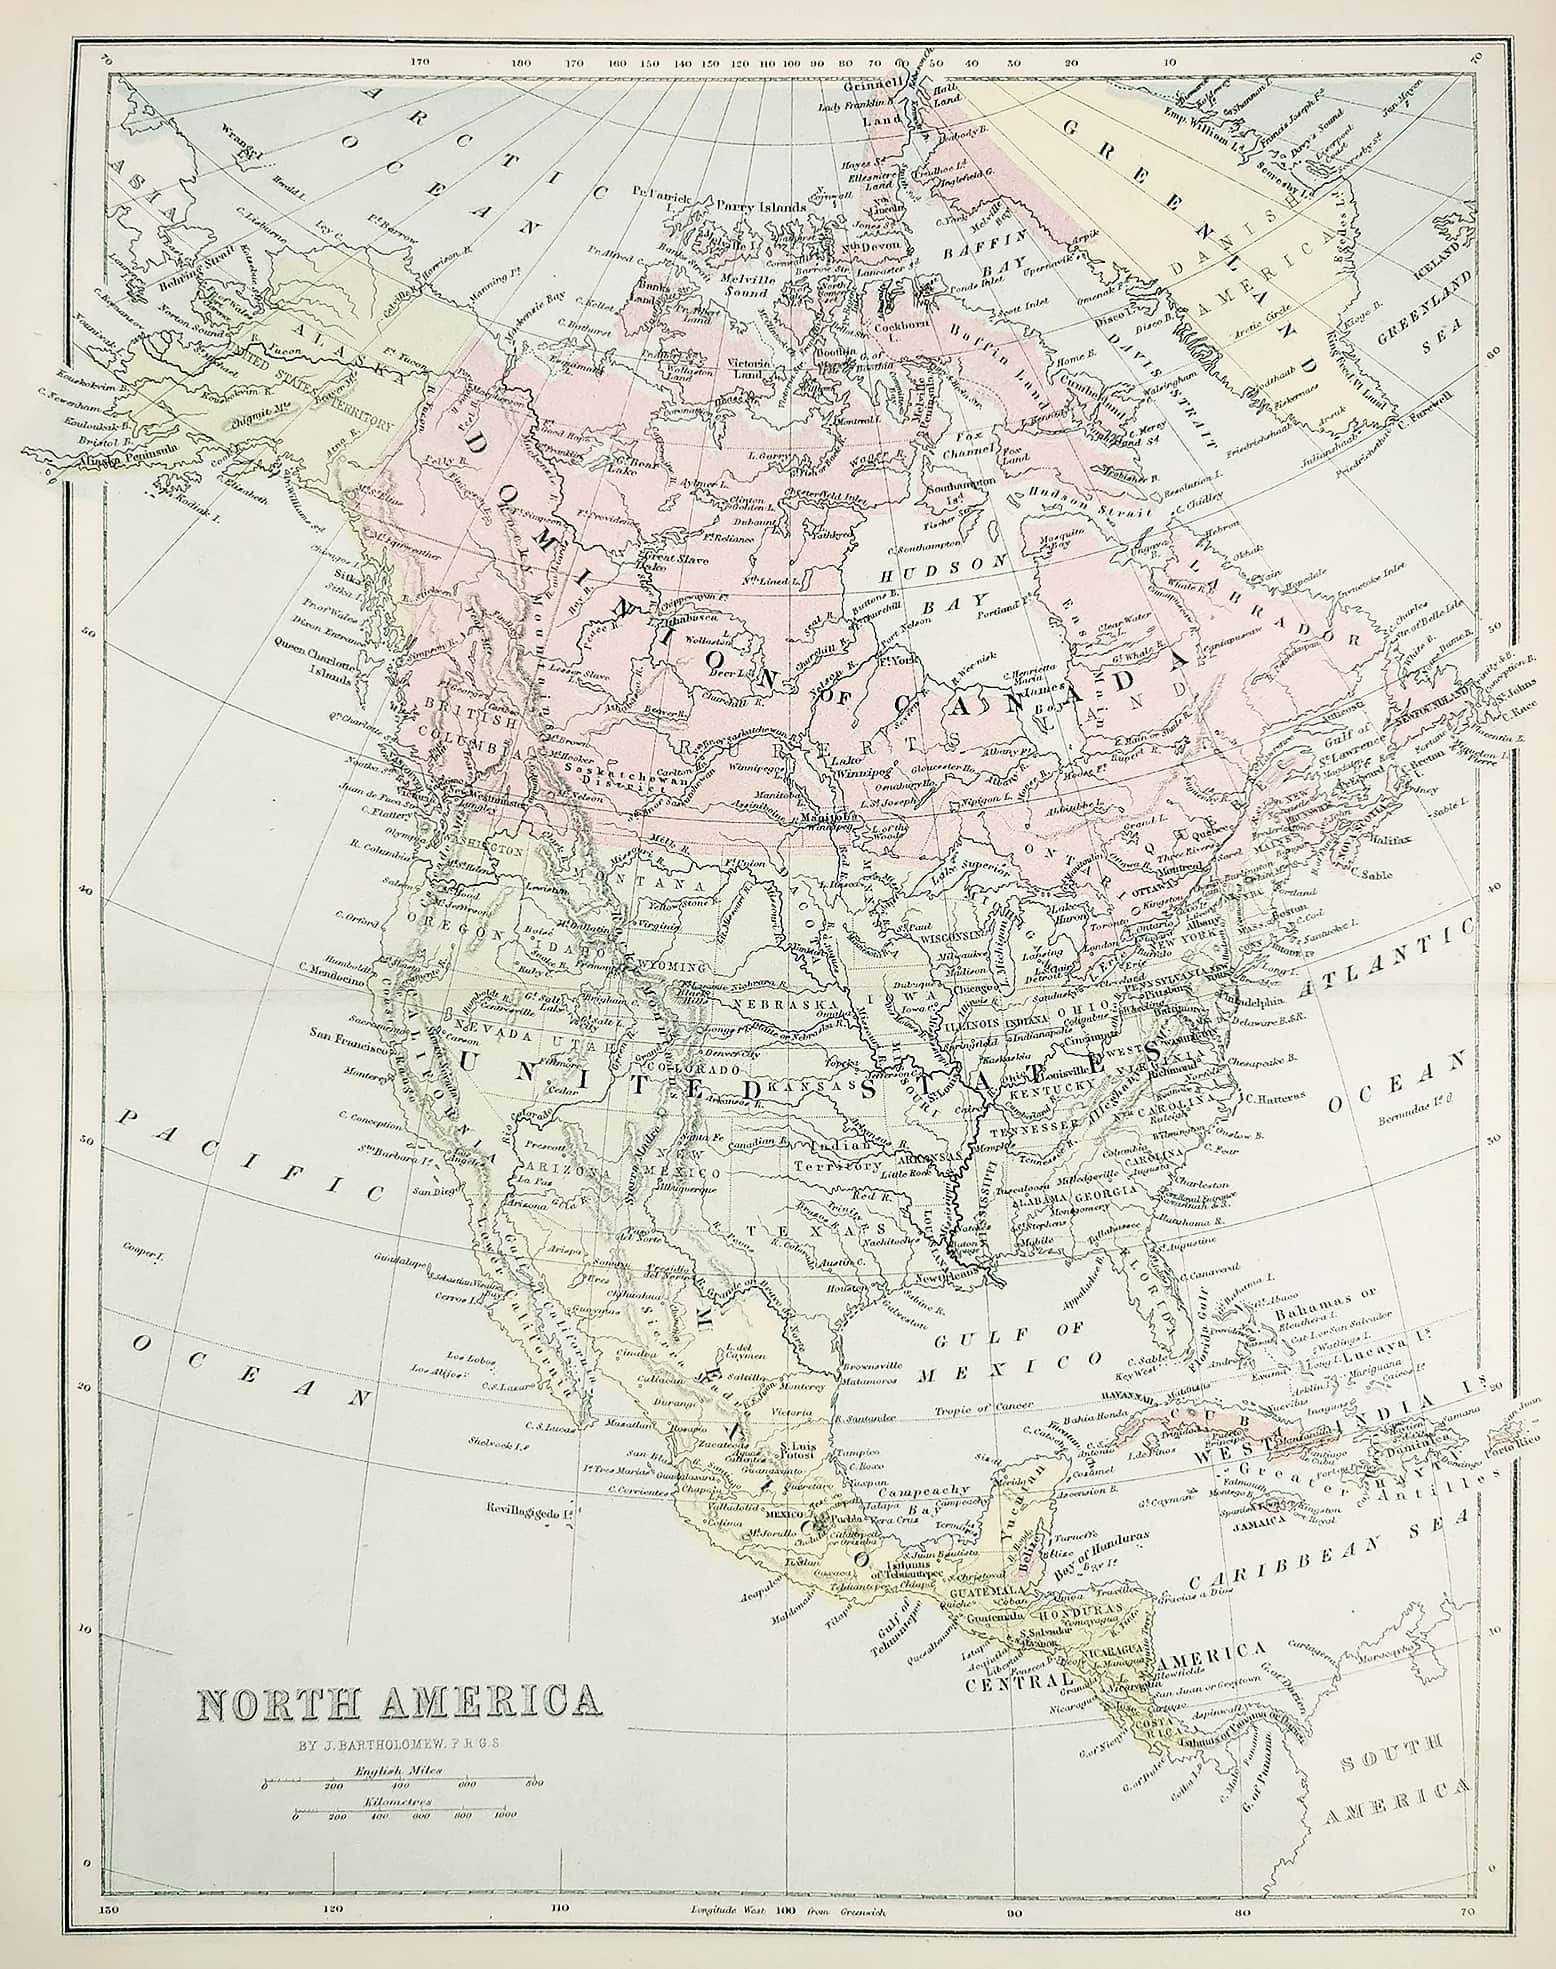 North America - Antique Map from 1890